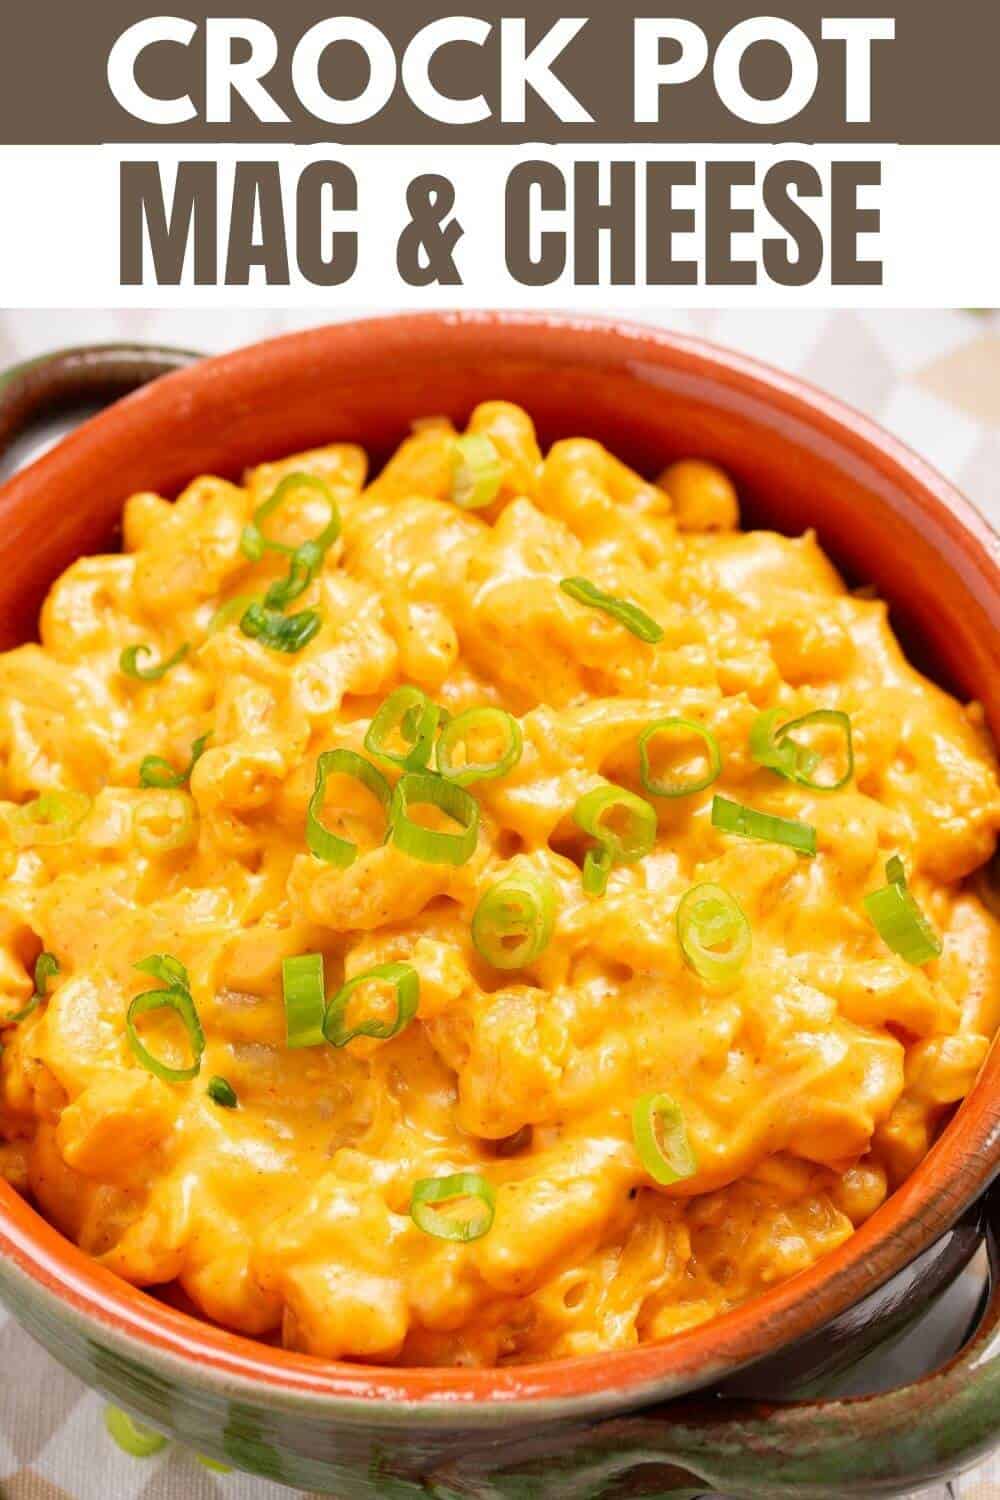 Crock pot mac and cheese in a bowl.